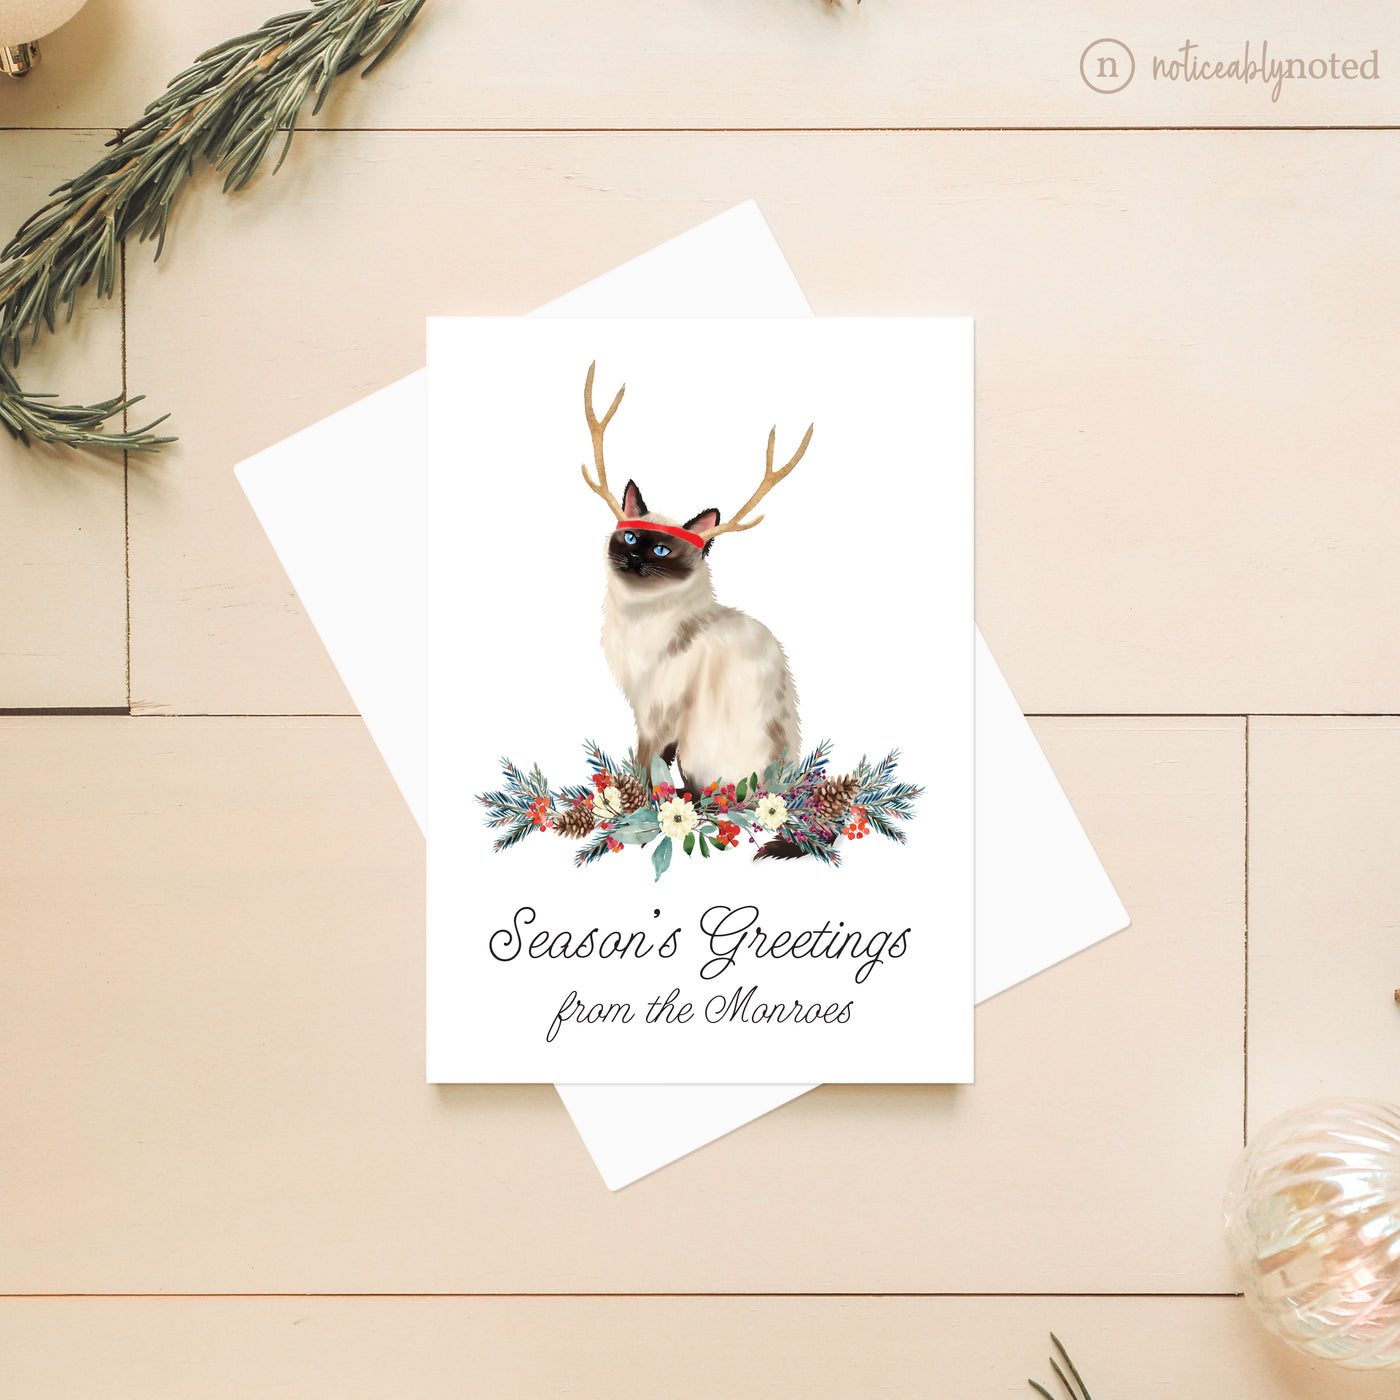 Himalayan Christmas Card | Noticeably Noted